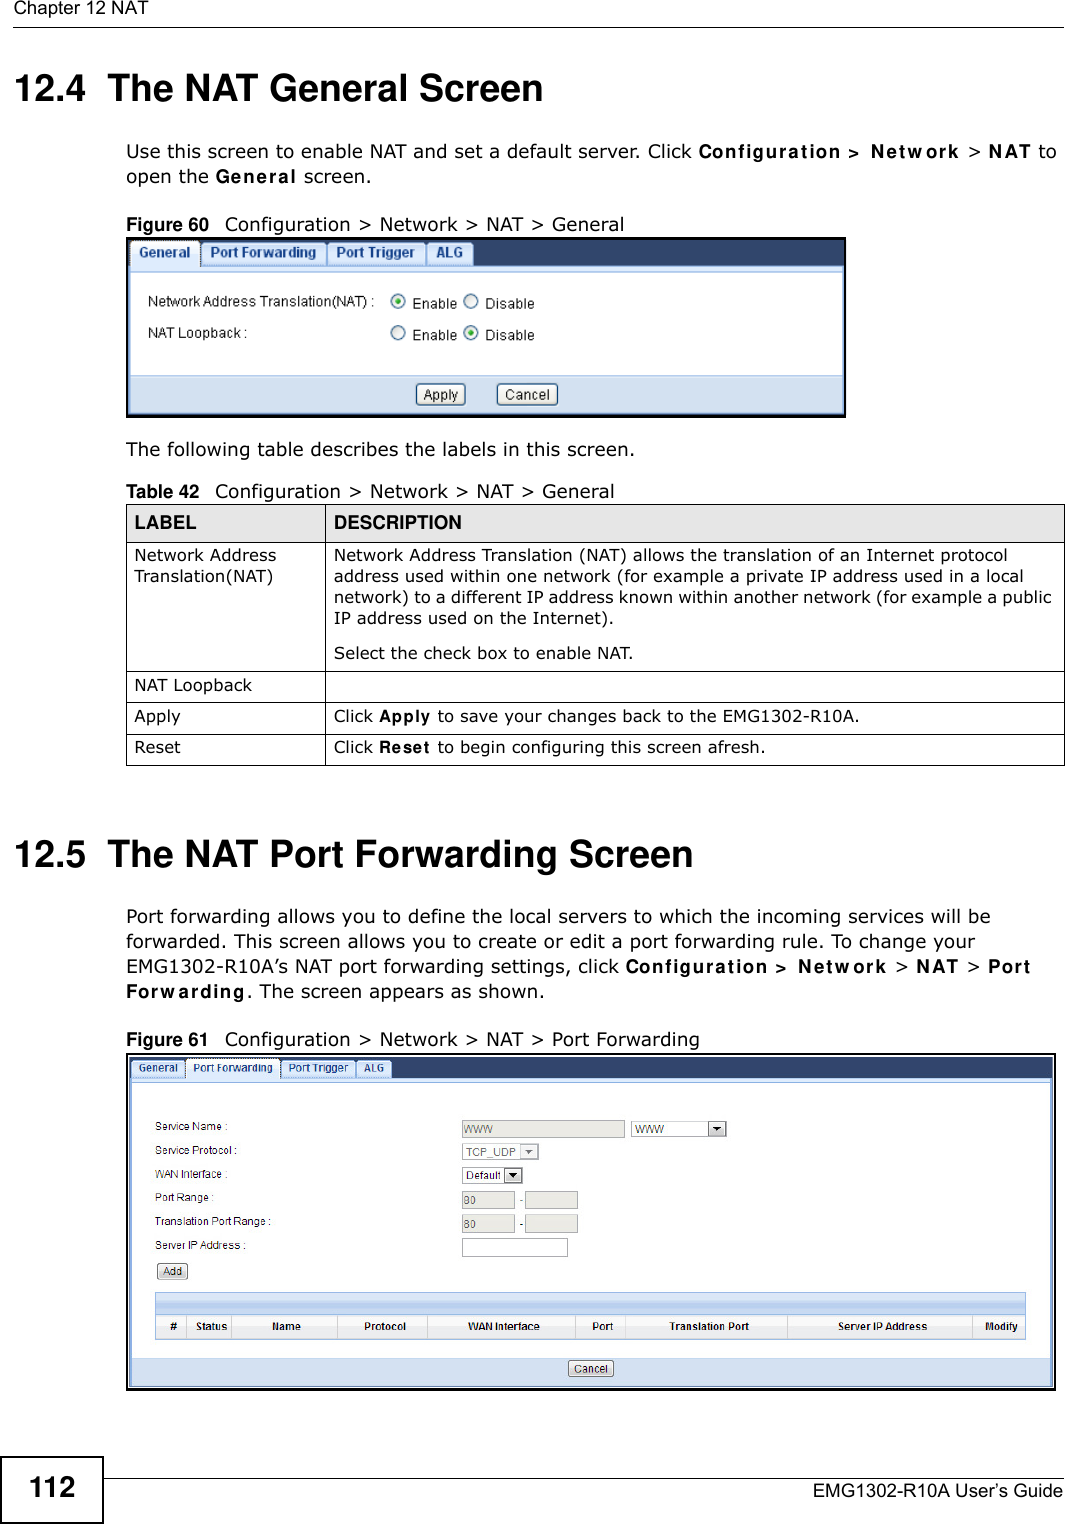 Chapter 12 NATEMG1302-R10A User’s Guide11212.4  The NAT General ScreenUse this screen to enable NAT and set a default server. Click Configurat ion &gt;  N e t w or k  &gt; N AT to open the Genera l screen.Figure 60   Configuration &gt; Network &gt; NAT &gt; General The following table describes the labels in this screen.12.5  The NAT Port Forwarding ScreenPort forwarding allows you to define the local servers to which the incoming services will be forwarded. This screen allows you to create or edit a port forwarding rule. To change your EMG1302-R10A’s NAT port forwarding settings, click Configur a t ion &gt;  N e t w or k  &gt; N AT &gt; Por t  For w a r din g . The screen appears as shown.Figure 61   Configuration &gt; Network &gt; NAT &gt; Port Forwarding Table 42   Configuration &gt; Network &gt; NAT &gt; GeneralLABEL DESCRIPTIONNetwork Address Translation(NAT)Network Address Translation (NAT) allows the translation of an Internet protocol address used within one network (for example a private IP address used in a local network) to a different IP address known within another network (for example a public IP address used on the Internet).Select the check box to enable NAT.NAT LoopbackApply Click Apply to save your changes back to the EMG1302-R10A.Reset Click Re se t  to begin configuring this screen afresh.